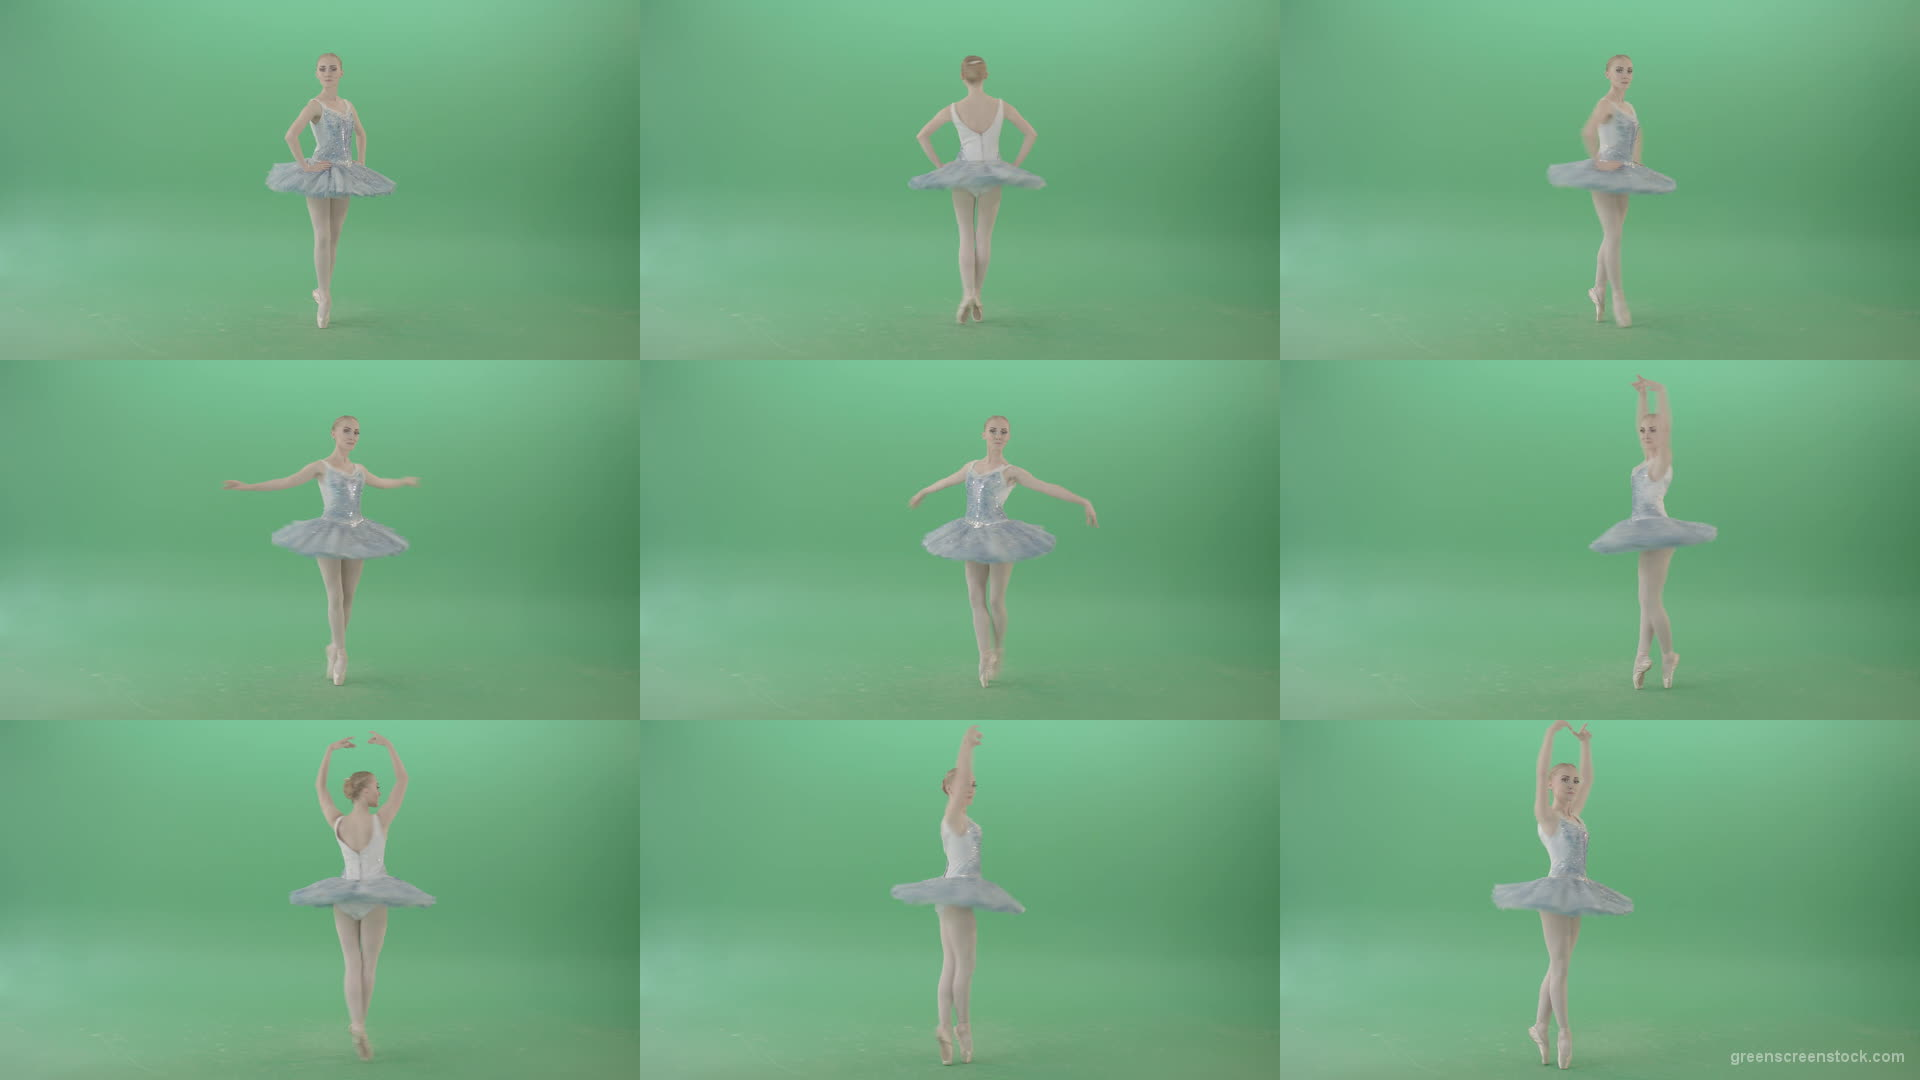 Beauty-blonde-girl-with-happy-smile-spinning-in-ballet-dress-over-green-screen-4K-Video-Footage-1920 Green Screen Stock